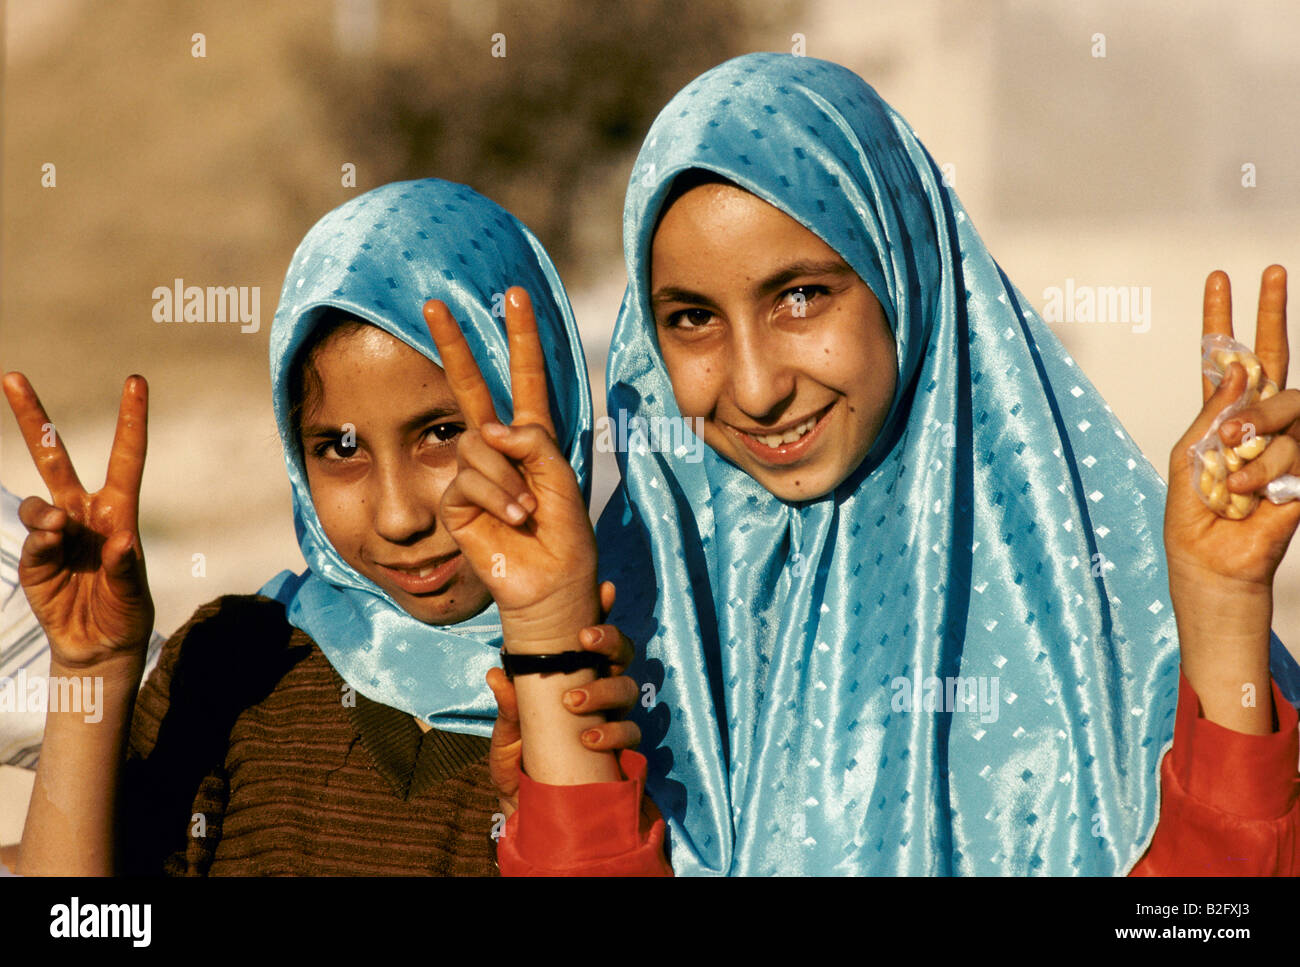 two muslim girls in headscarfs making the peace sign at palestinian demonstration, amman Stock Photo